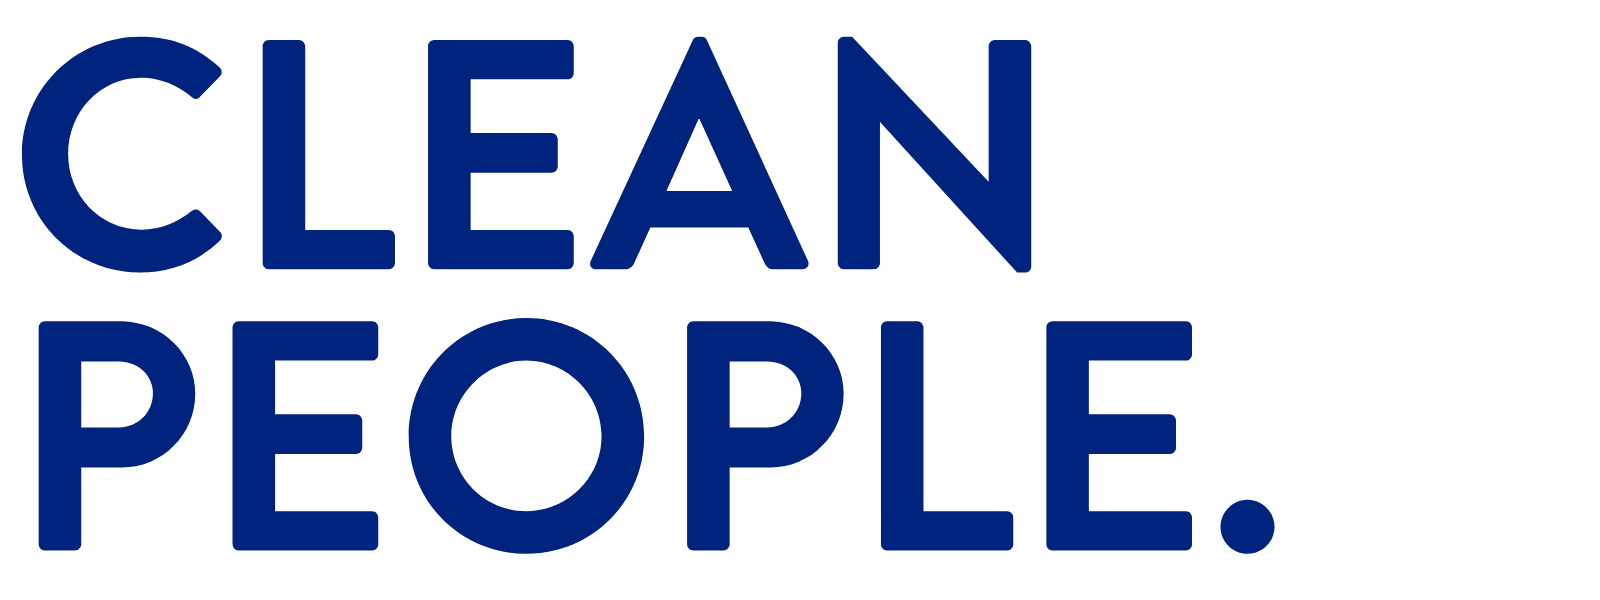 Getcleanpeople